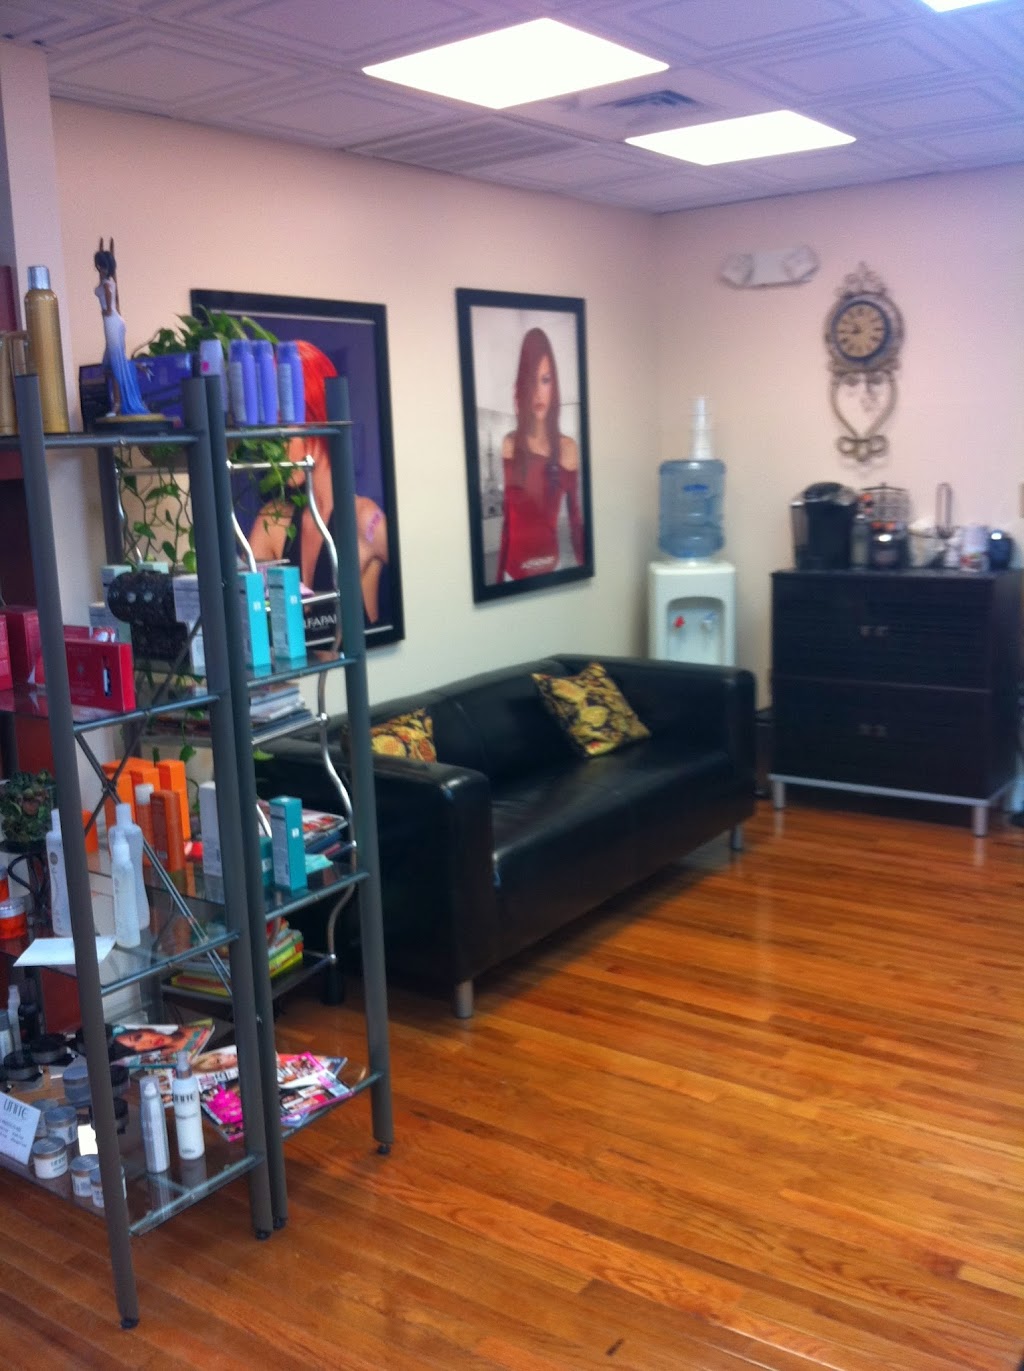 Hairs Talent / GinaCurl | 30 Main St, East Haven, CT 06512 | Phone: (203) 466-1246